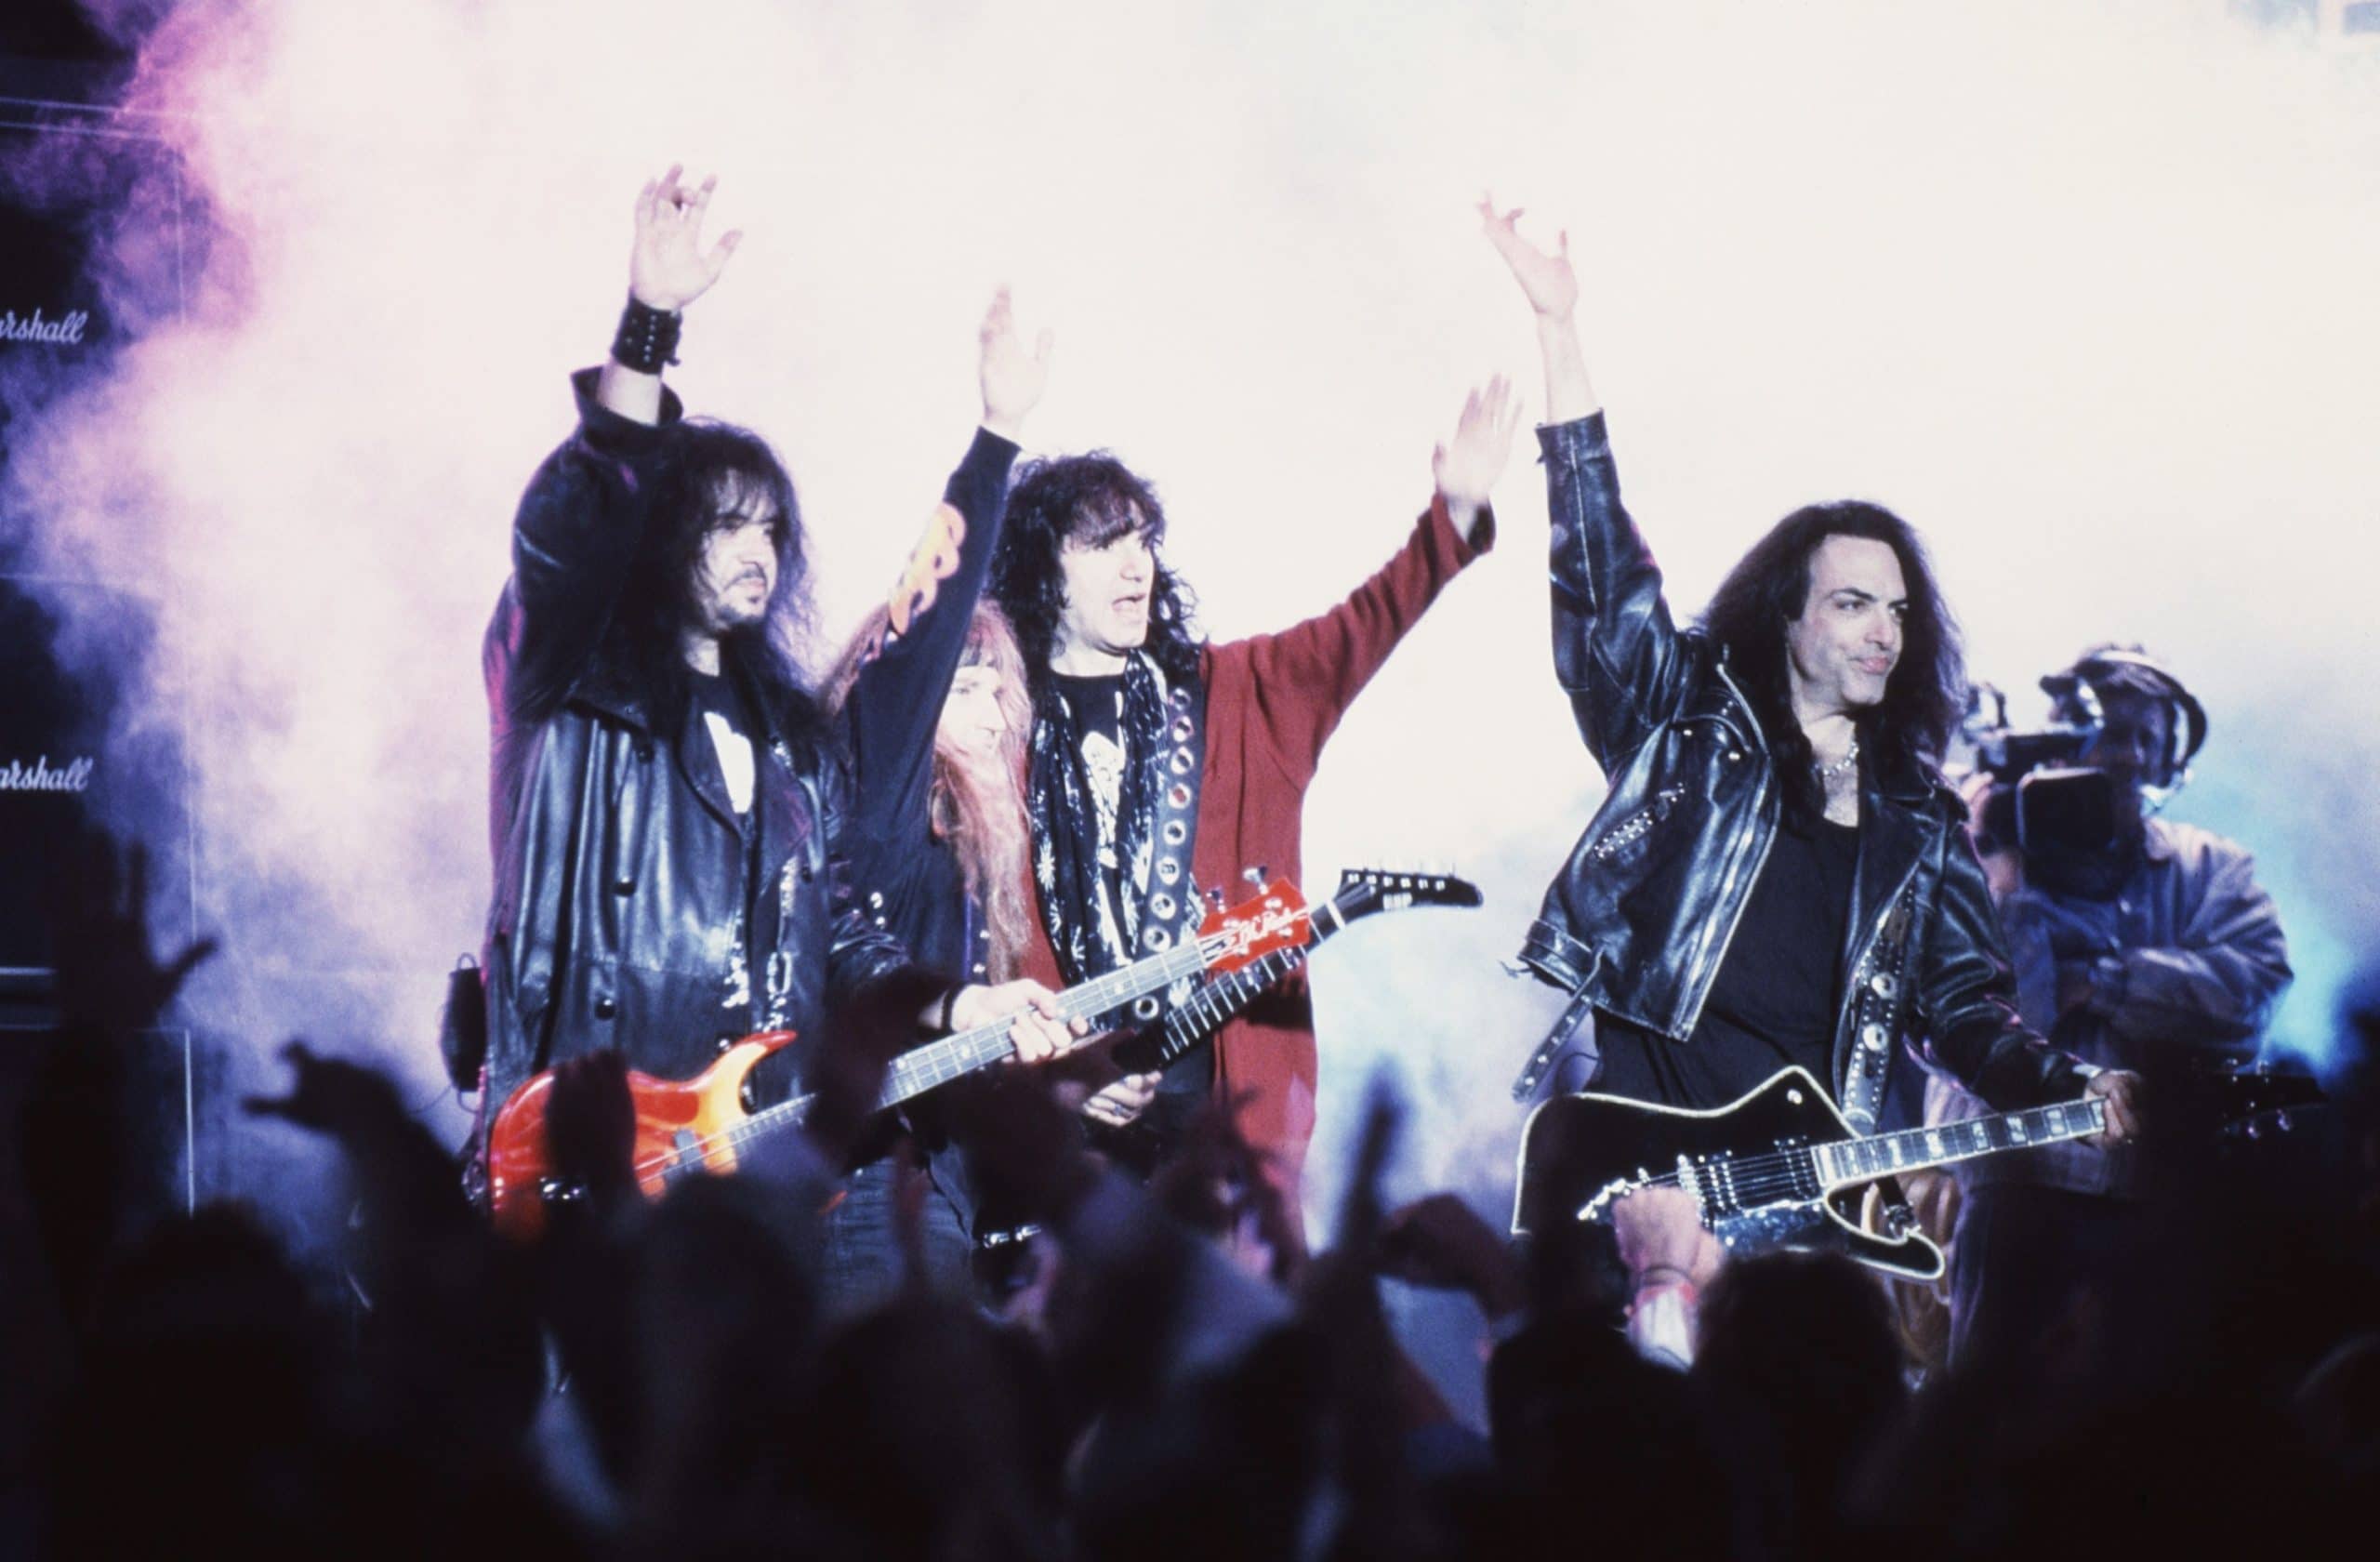 Kiss, on stage (without makeup), from left: Gene Simmons, Eric Singer, Tommy Thayer, Paul Stanley, 1996